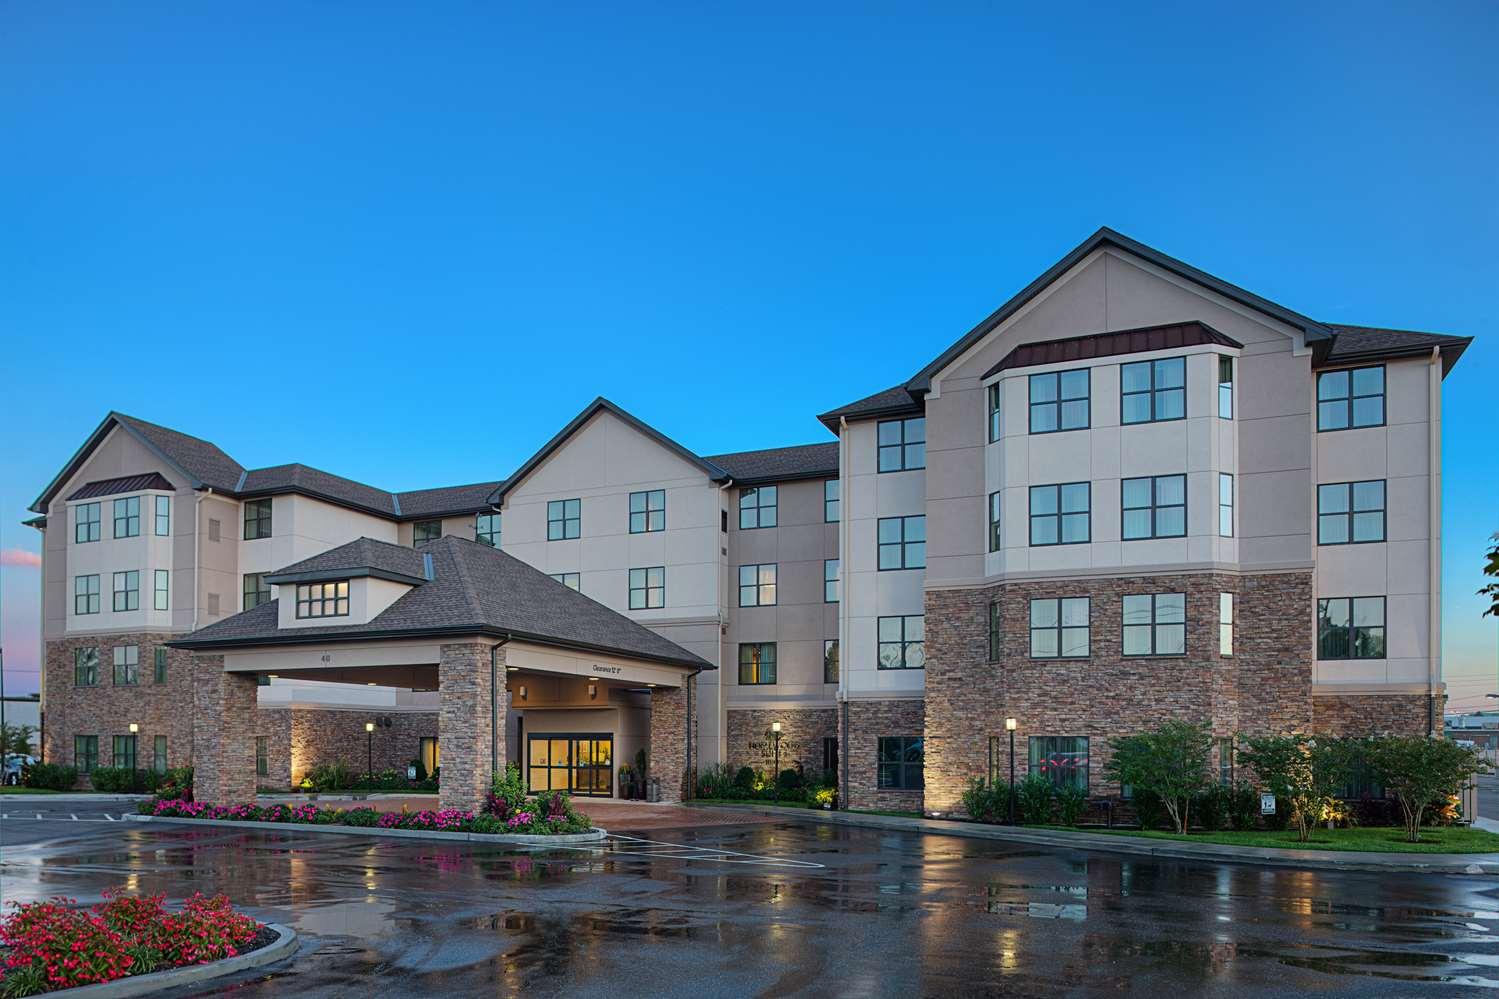 Homewood Suites by Hilton Carle Place - Garden City, NY in Carle Place, NY